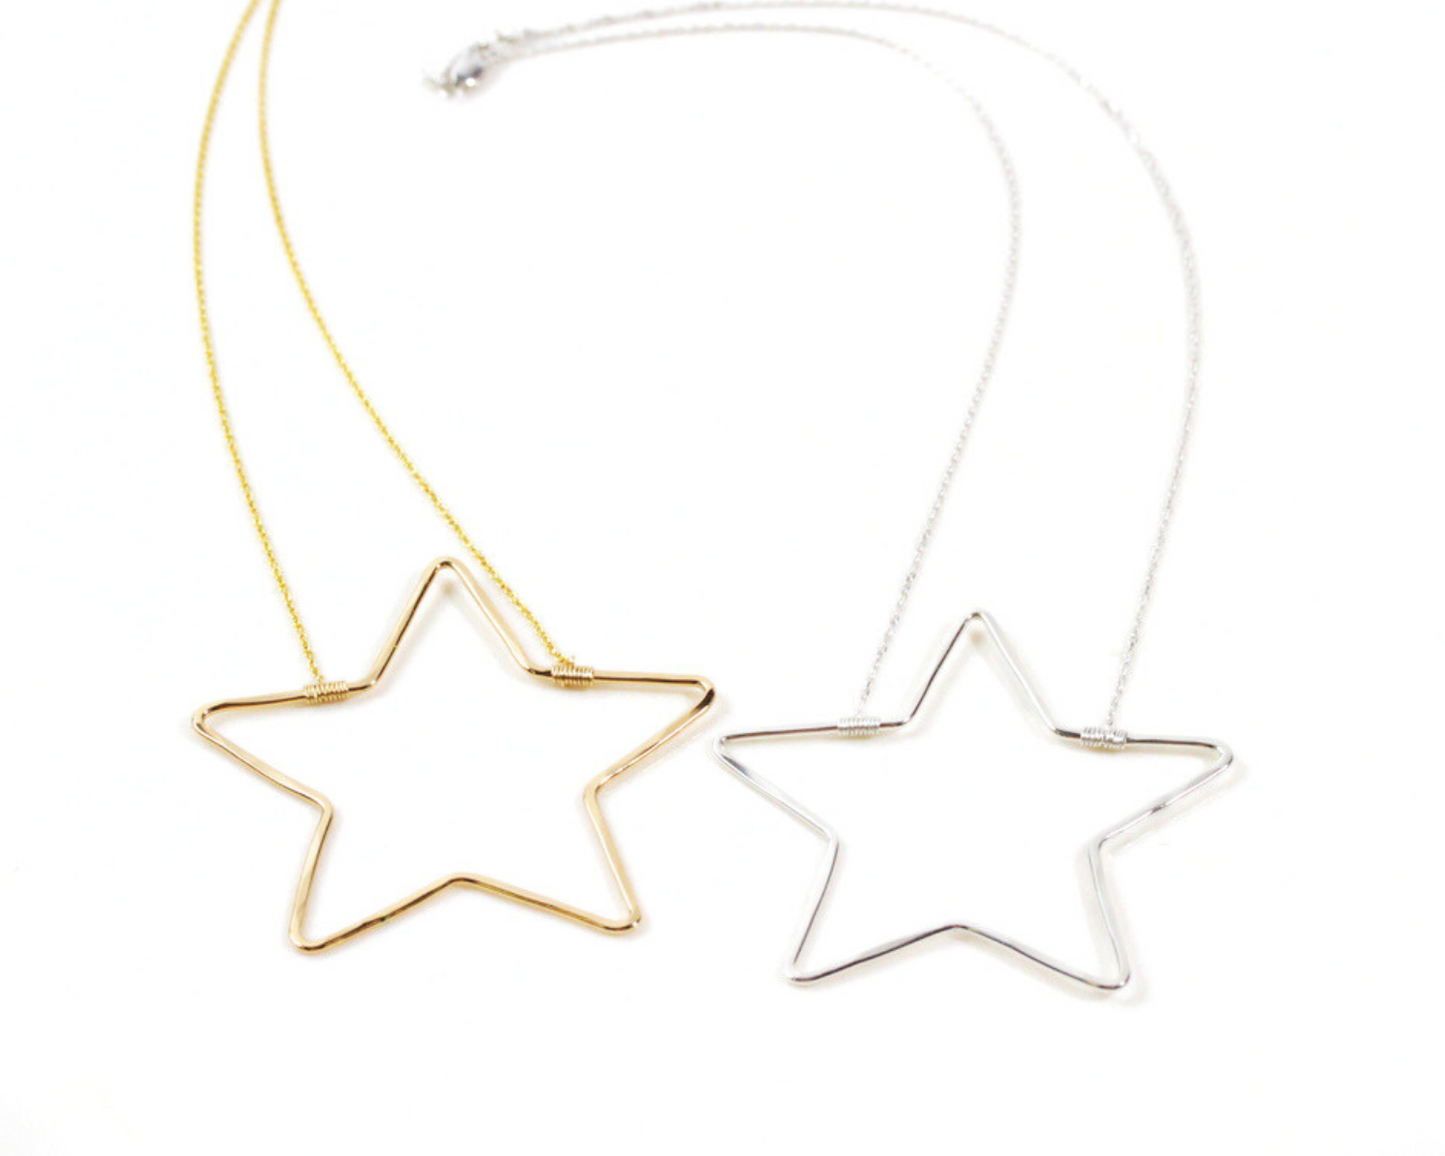 All of our completely hand forged and handcrafted pieces come thoughtfully and beautifully packaged. The Star Necklace fills your heart with light and casts rays of hope in every direction. Stellar craftsmanship and a bold size give it cosmic appeal.